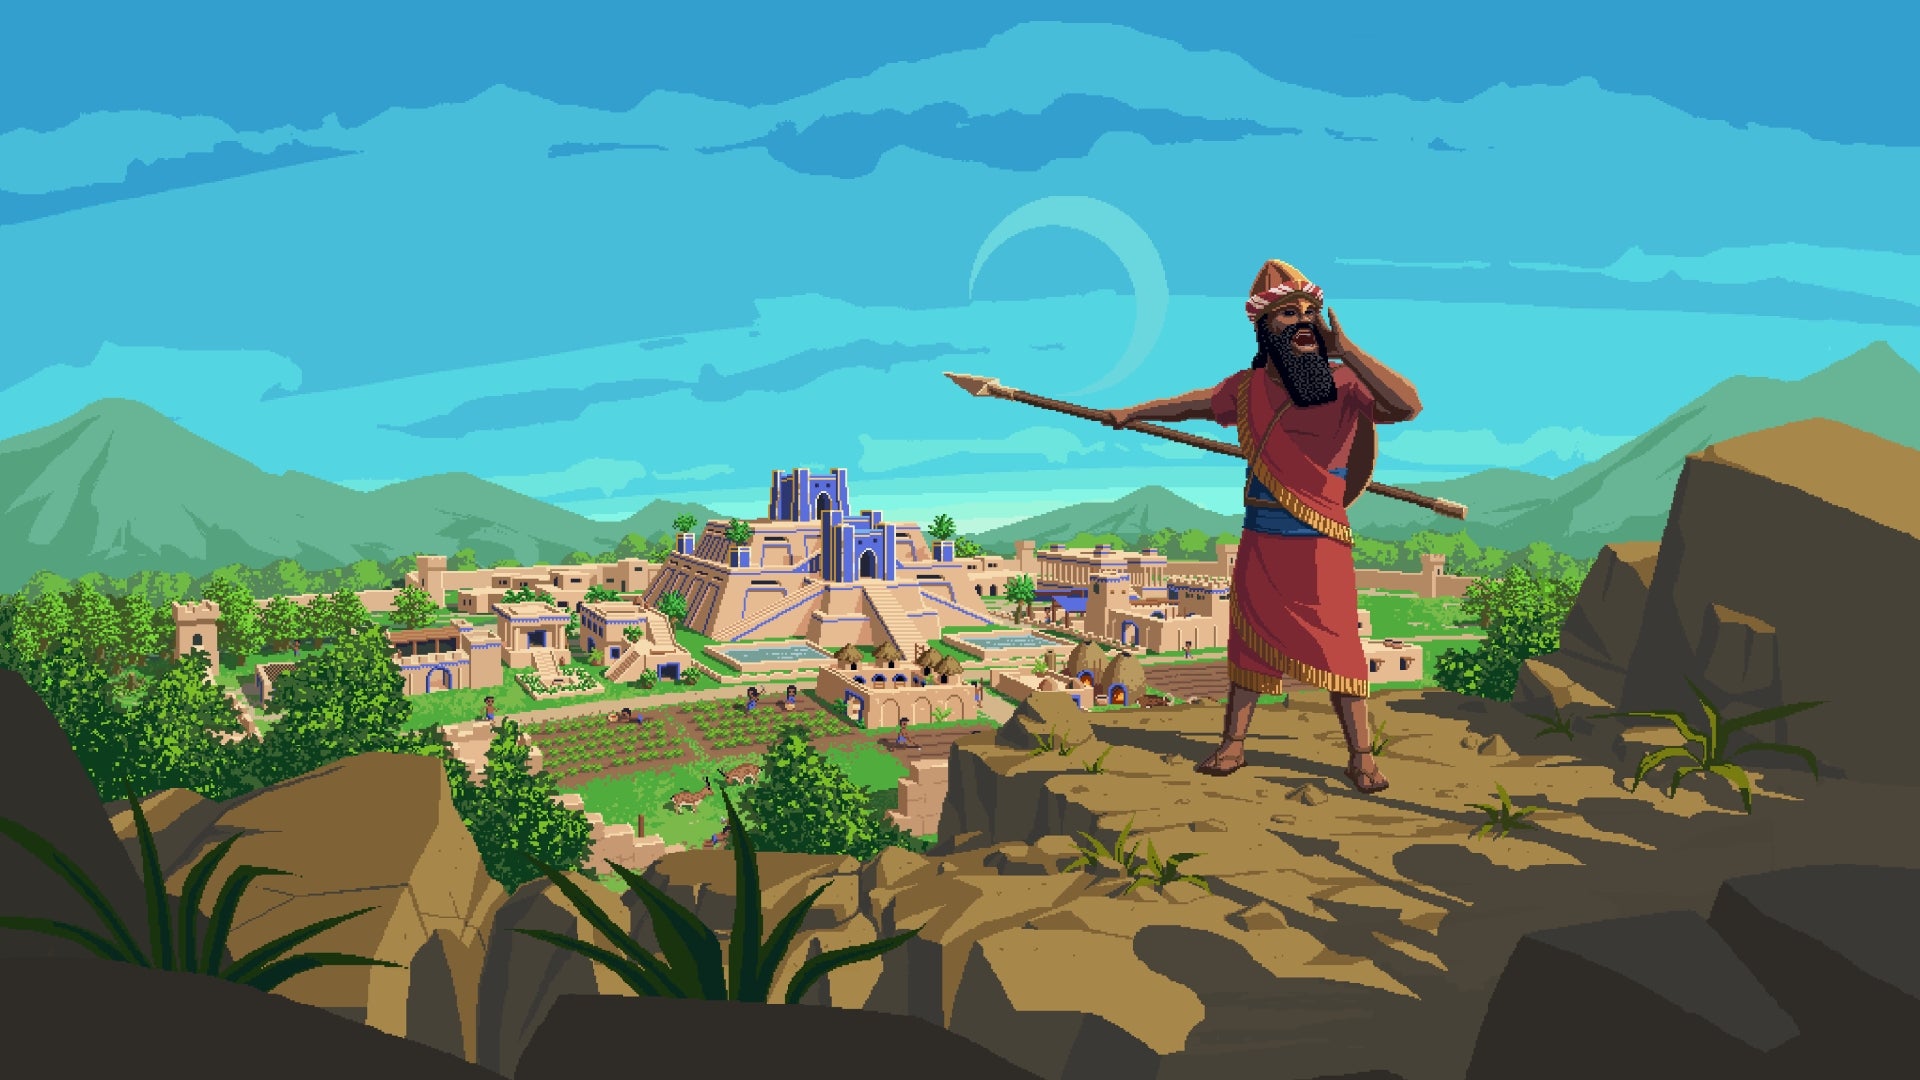 A man yells while holding a spear toward an advanced walled settlement in The Fertile Crescent